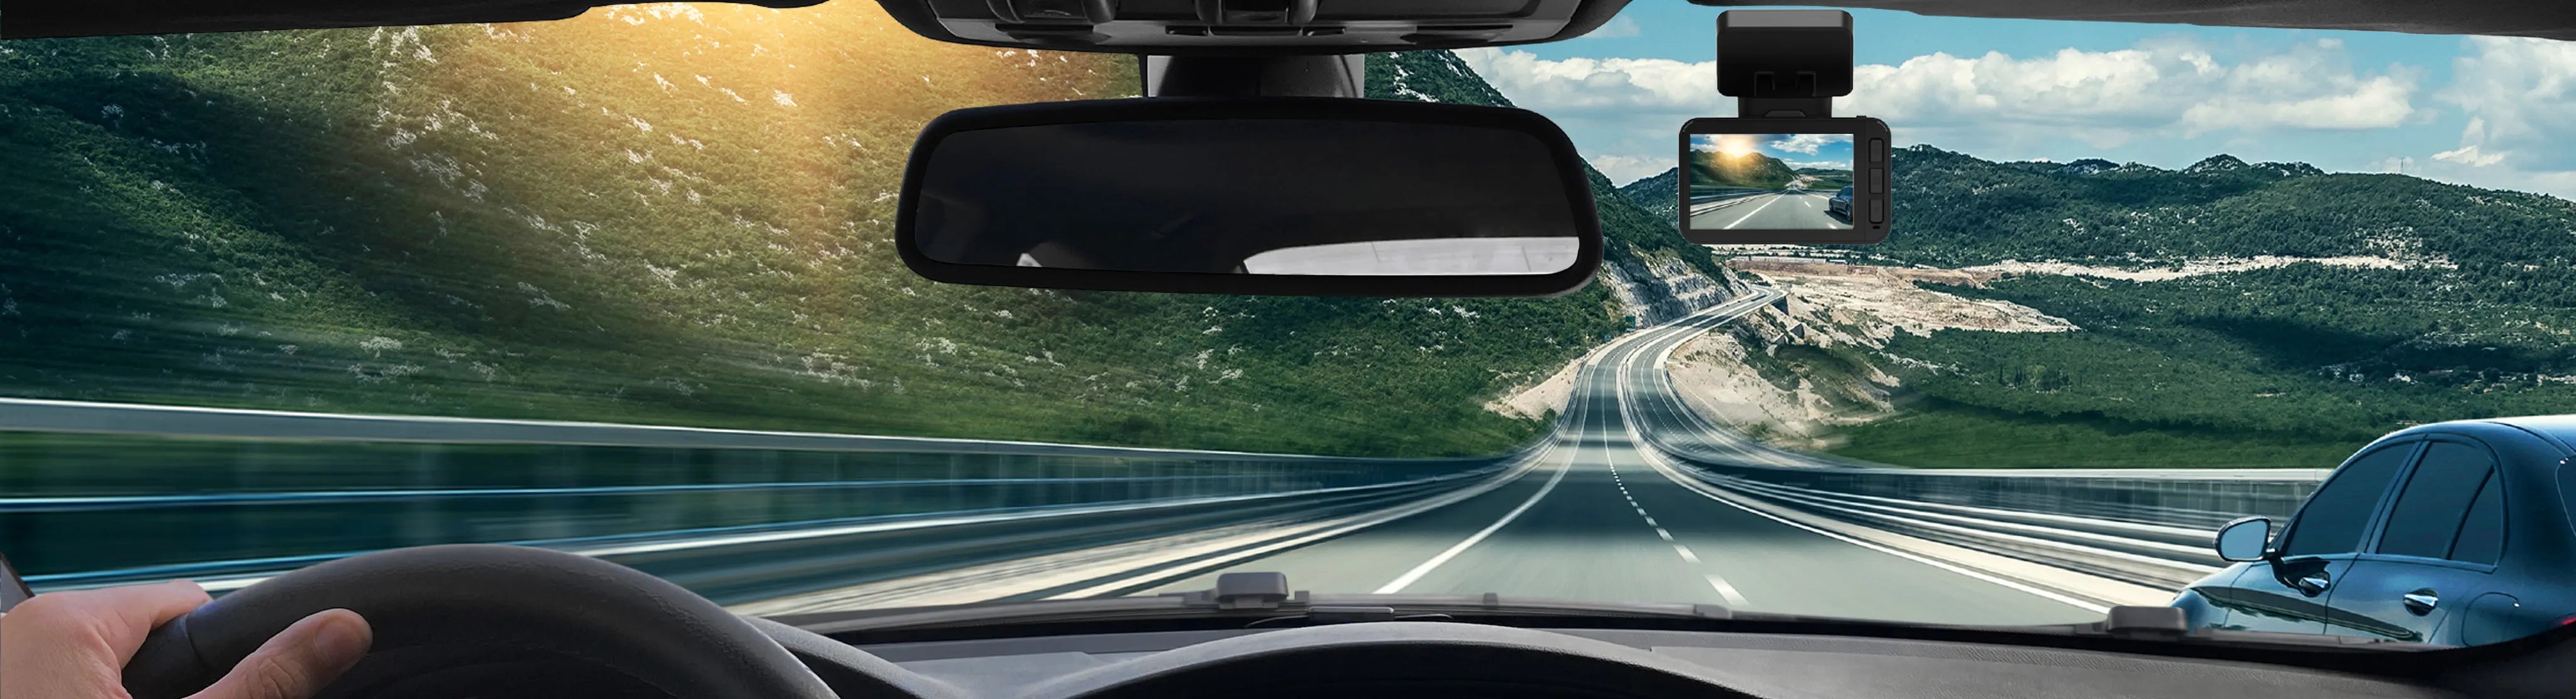 High-resolution Tellur dash cam capturing crystal-clear footage, designed for vigilant road surveillance and driver safety.